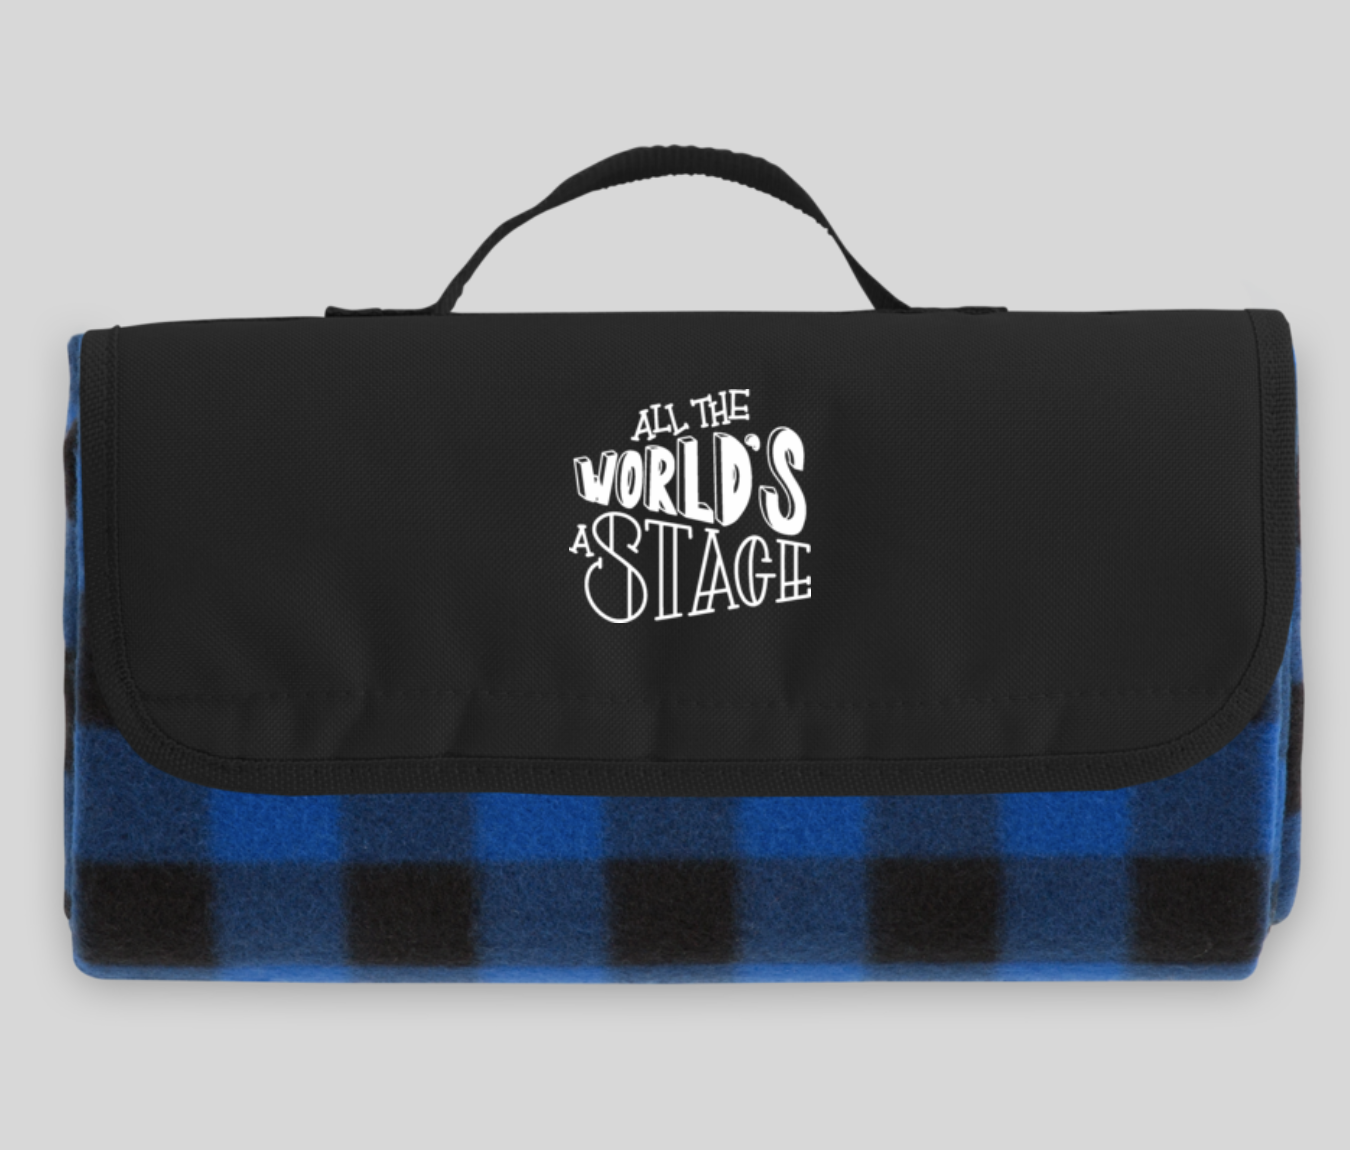 custom roll up fleece picnic blanket with the phrase "All the World's a Stage" on it